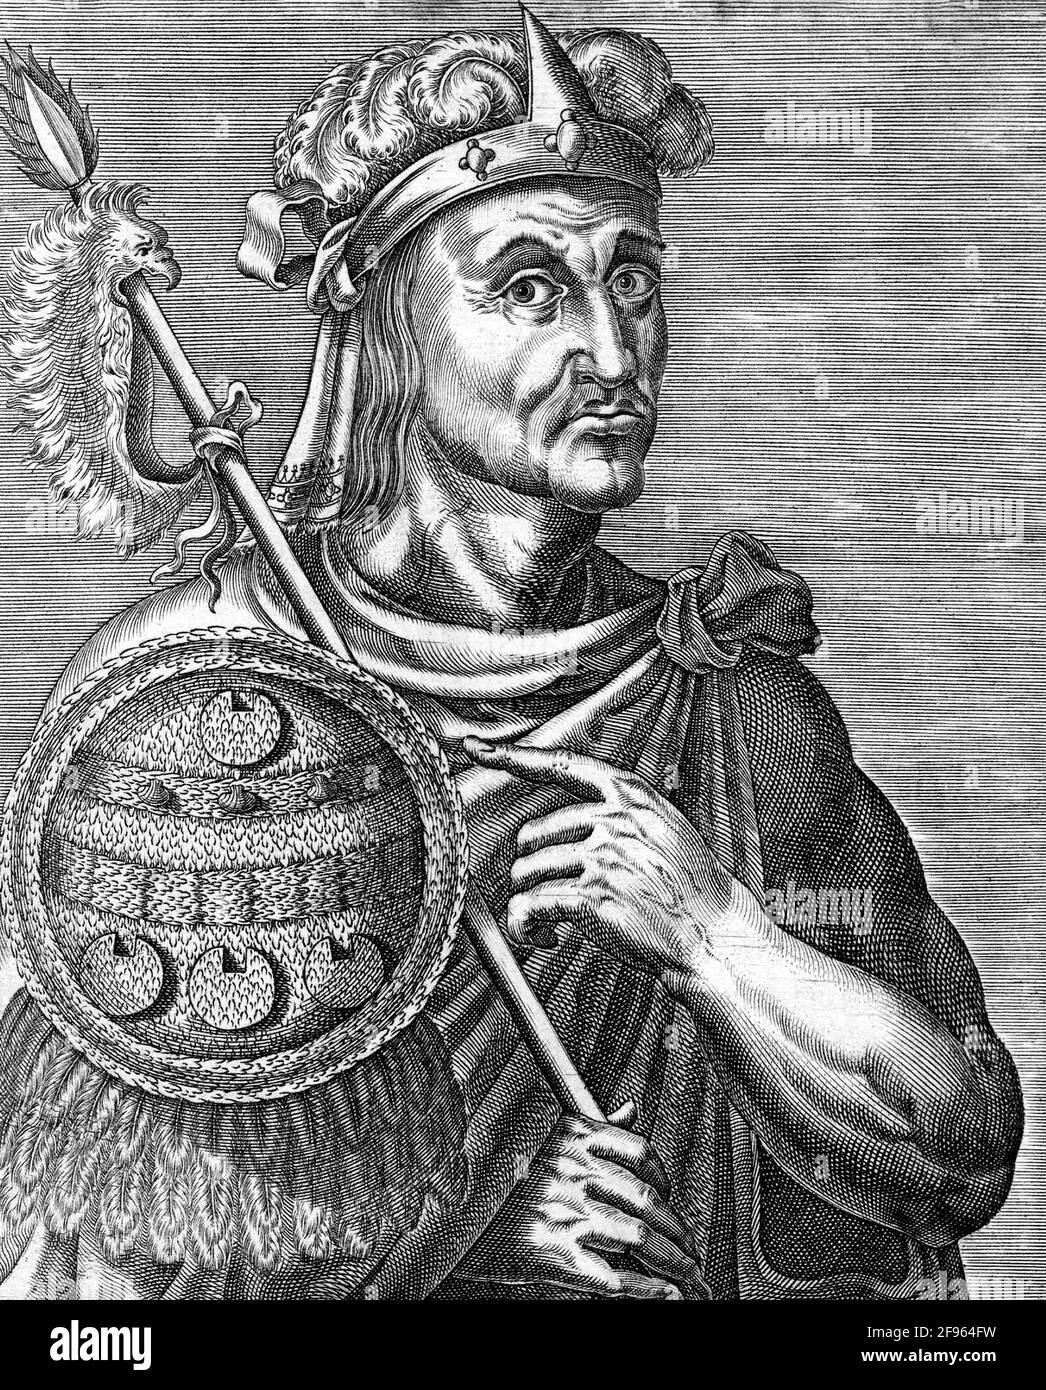 Moctezuma. Portrait of the ruler of the Aztec Empire at the time of the Spanish Conquest, Moctezuma Xocoyotzin (c. 1466 -1520), letterpress engraving, 1584 Stock Photo